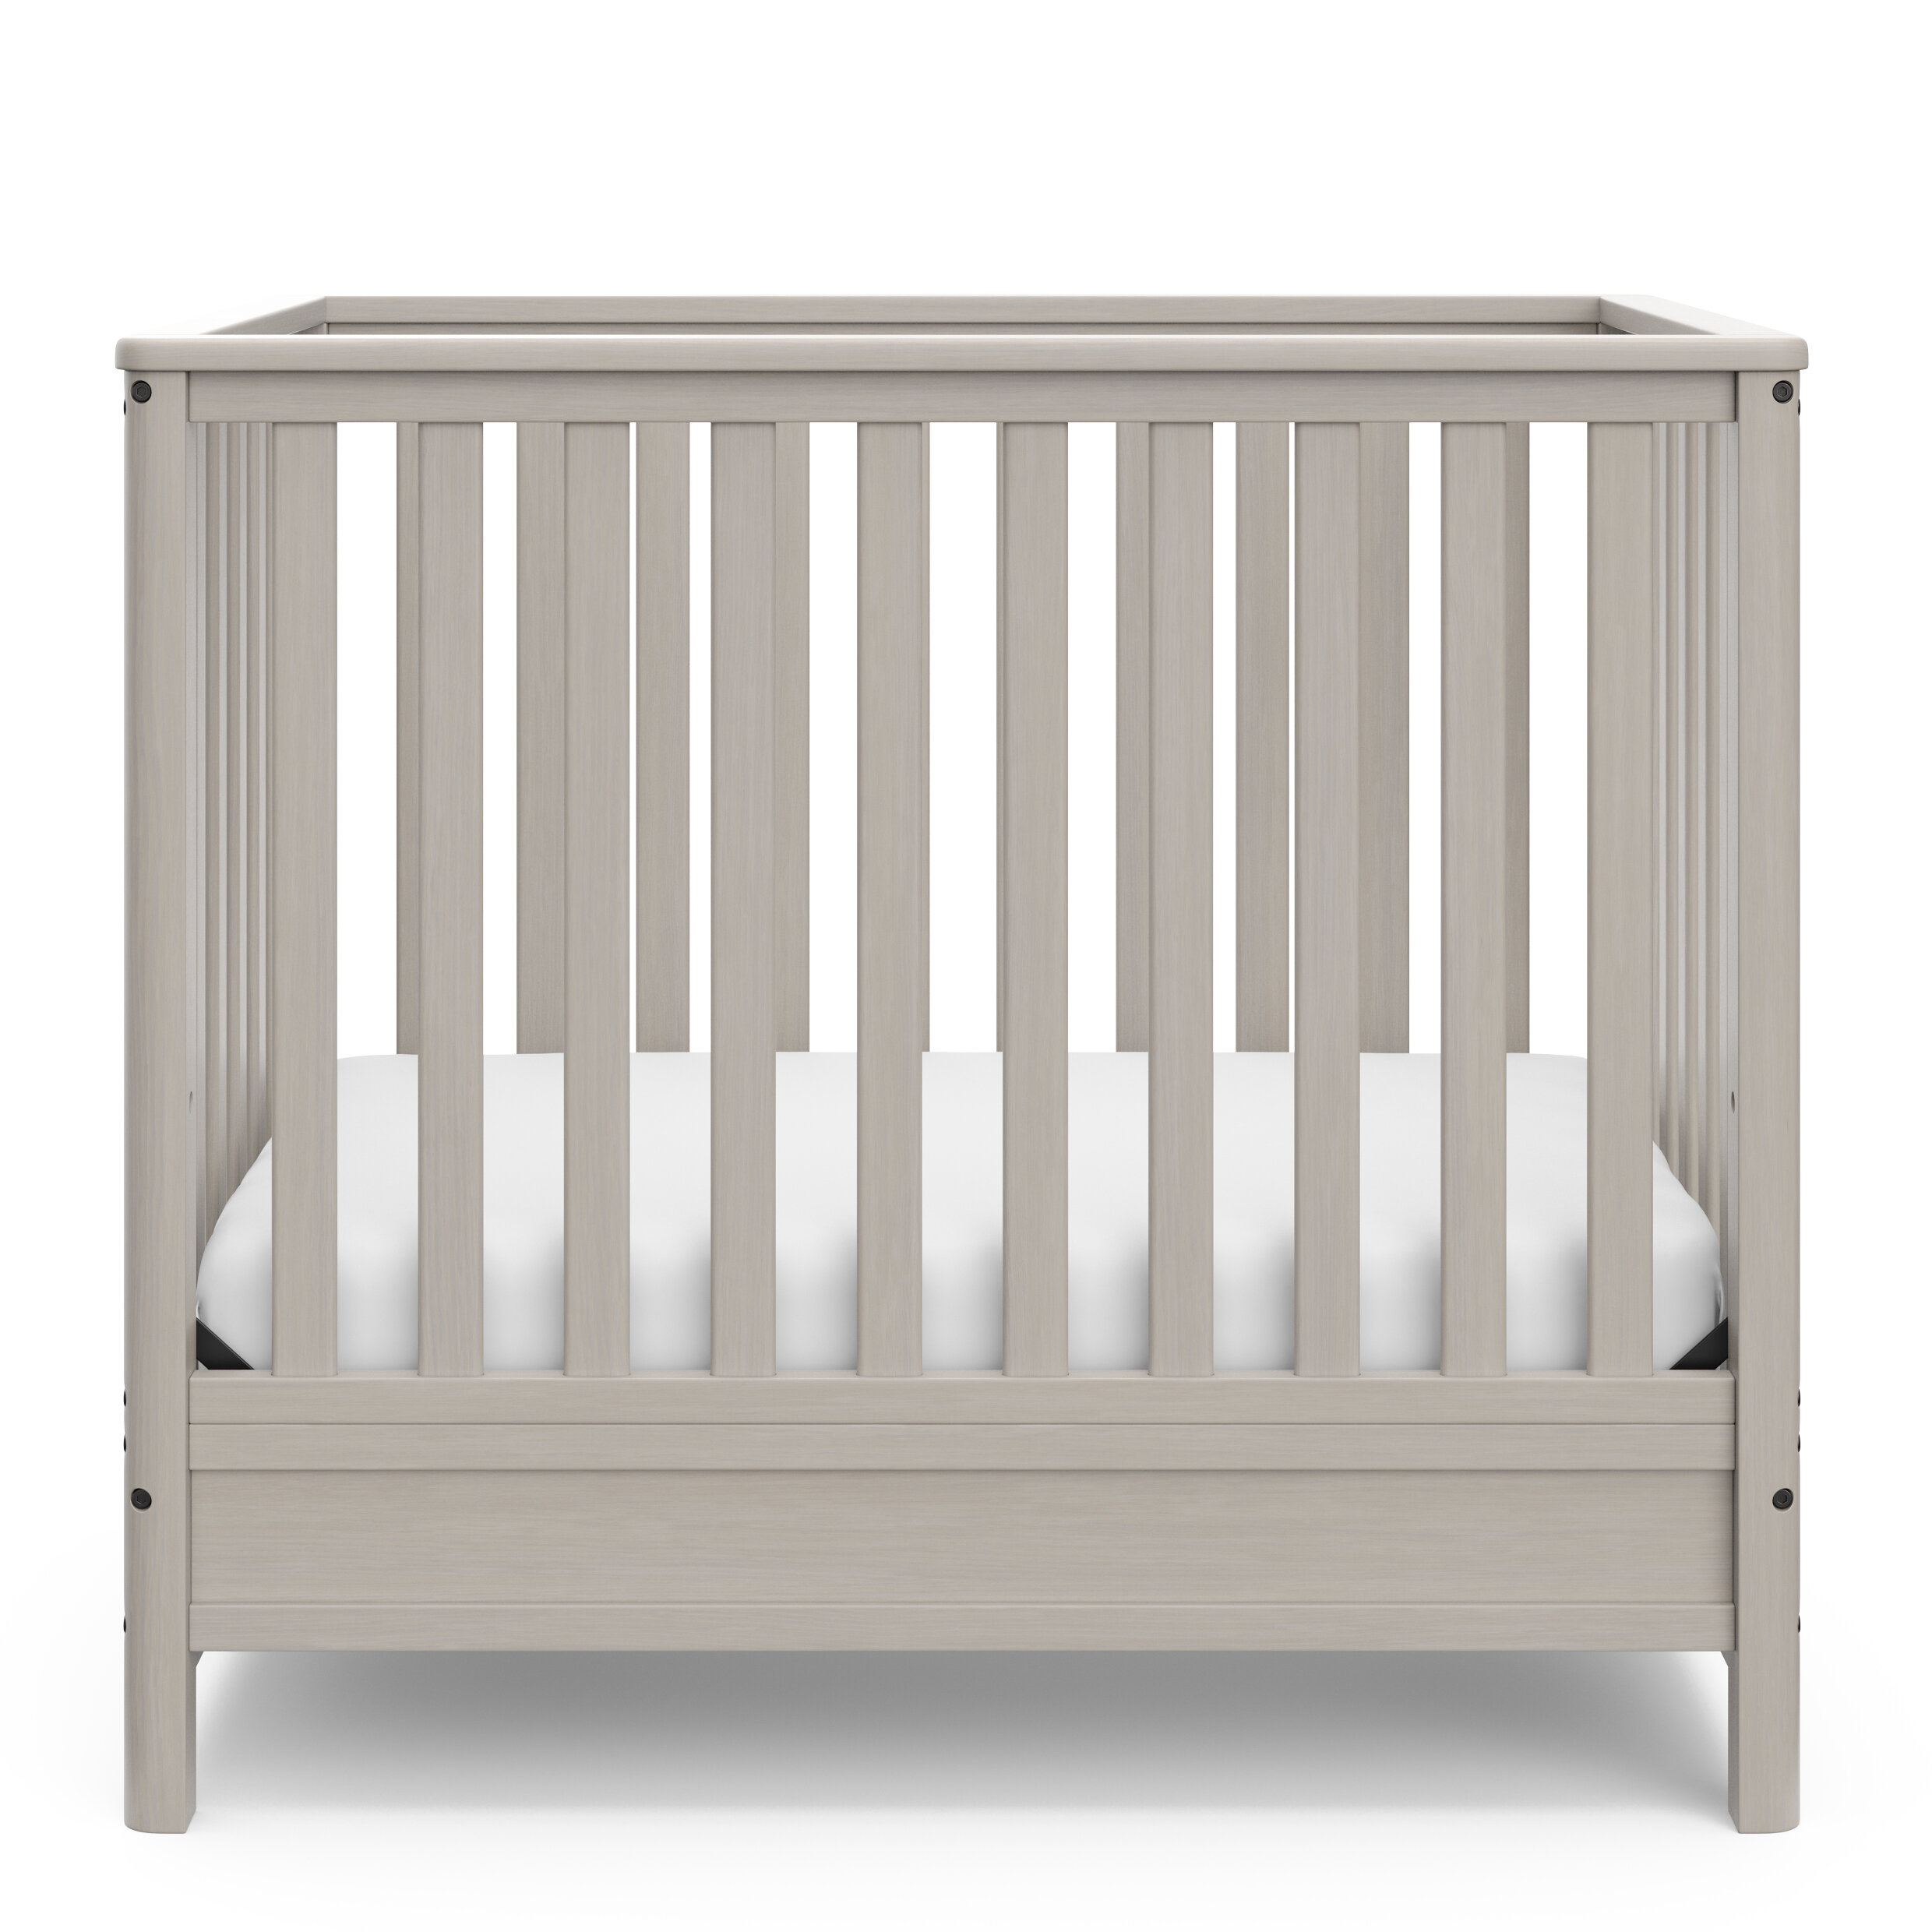 Storkcraft Petal 5-in-1 Convertible Mini Crib with Bonus Mattress Non-Toxic Finish Baby-Safe Gray Converts to Twin Bed Includes Premium Supportive Crib Mattress with Water-Resistant Cover 